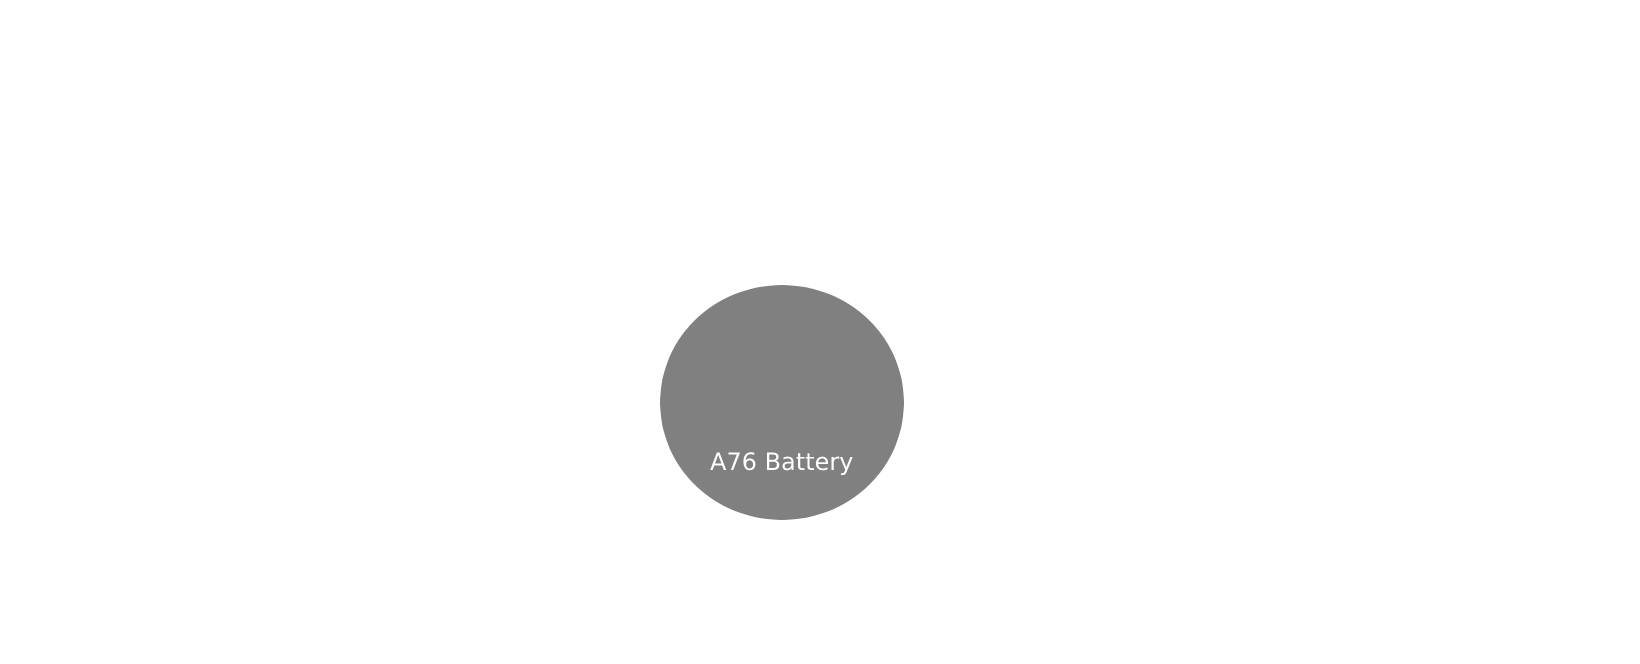 A76 Battery Equivalent